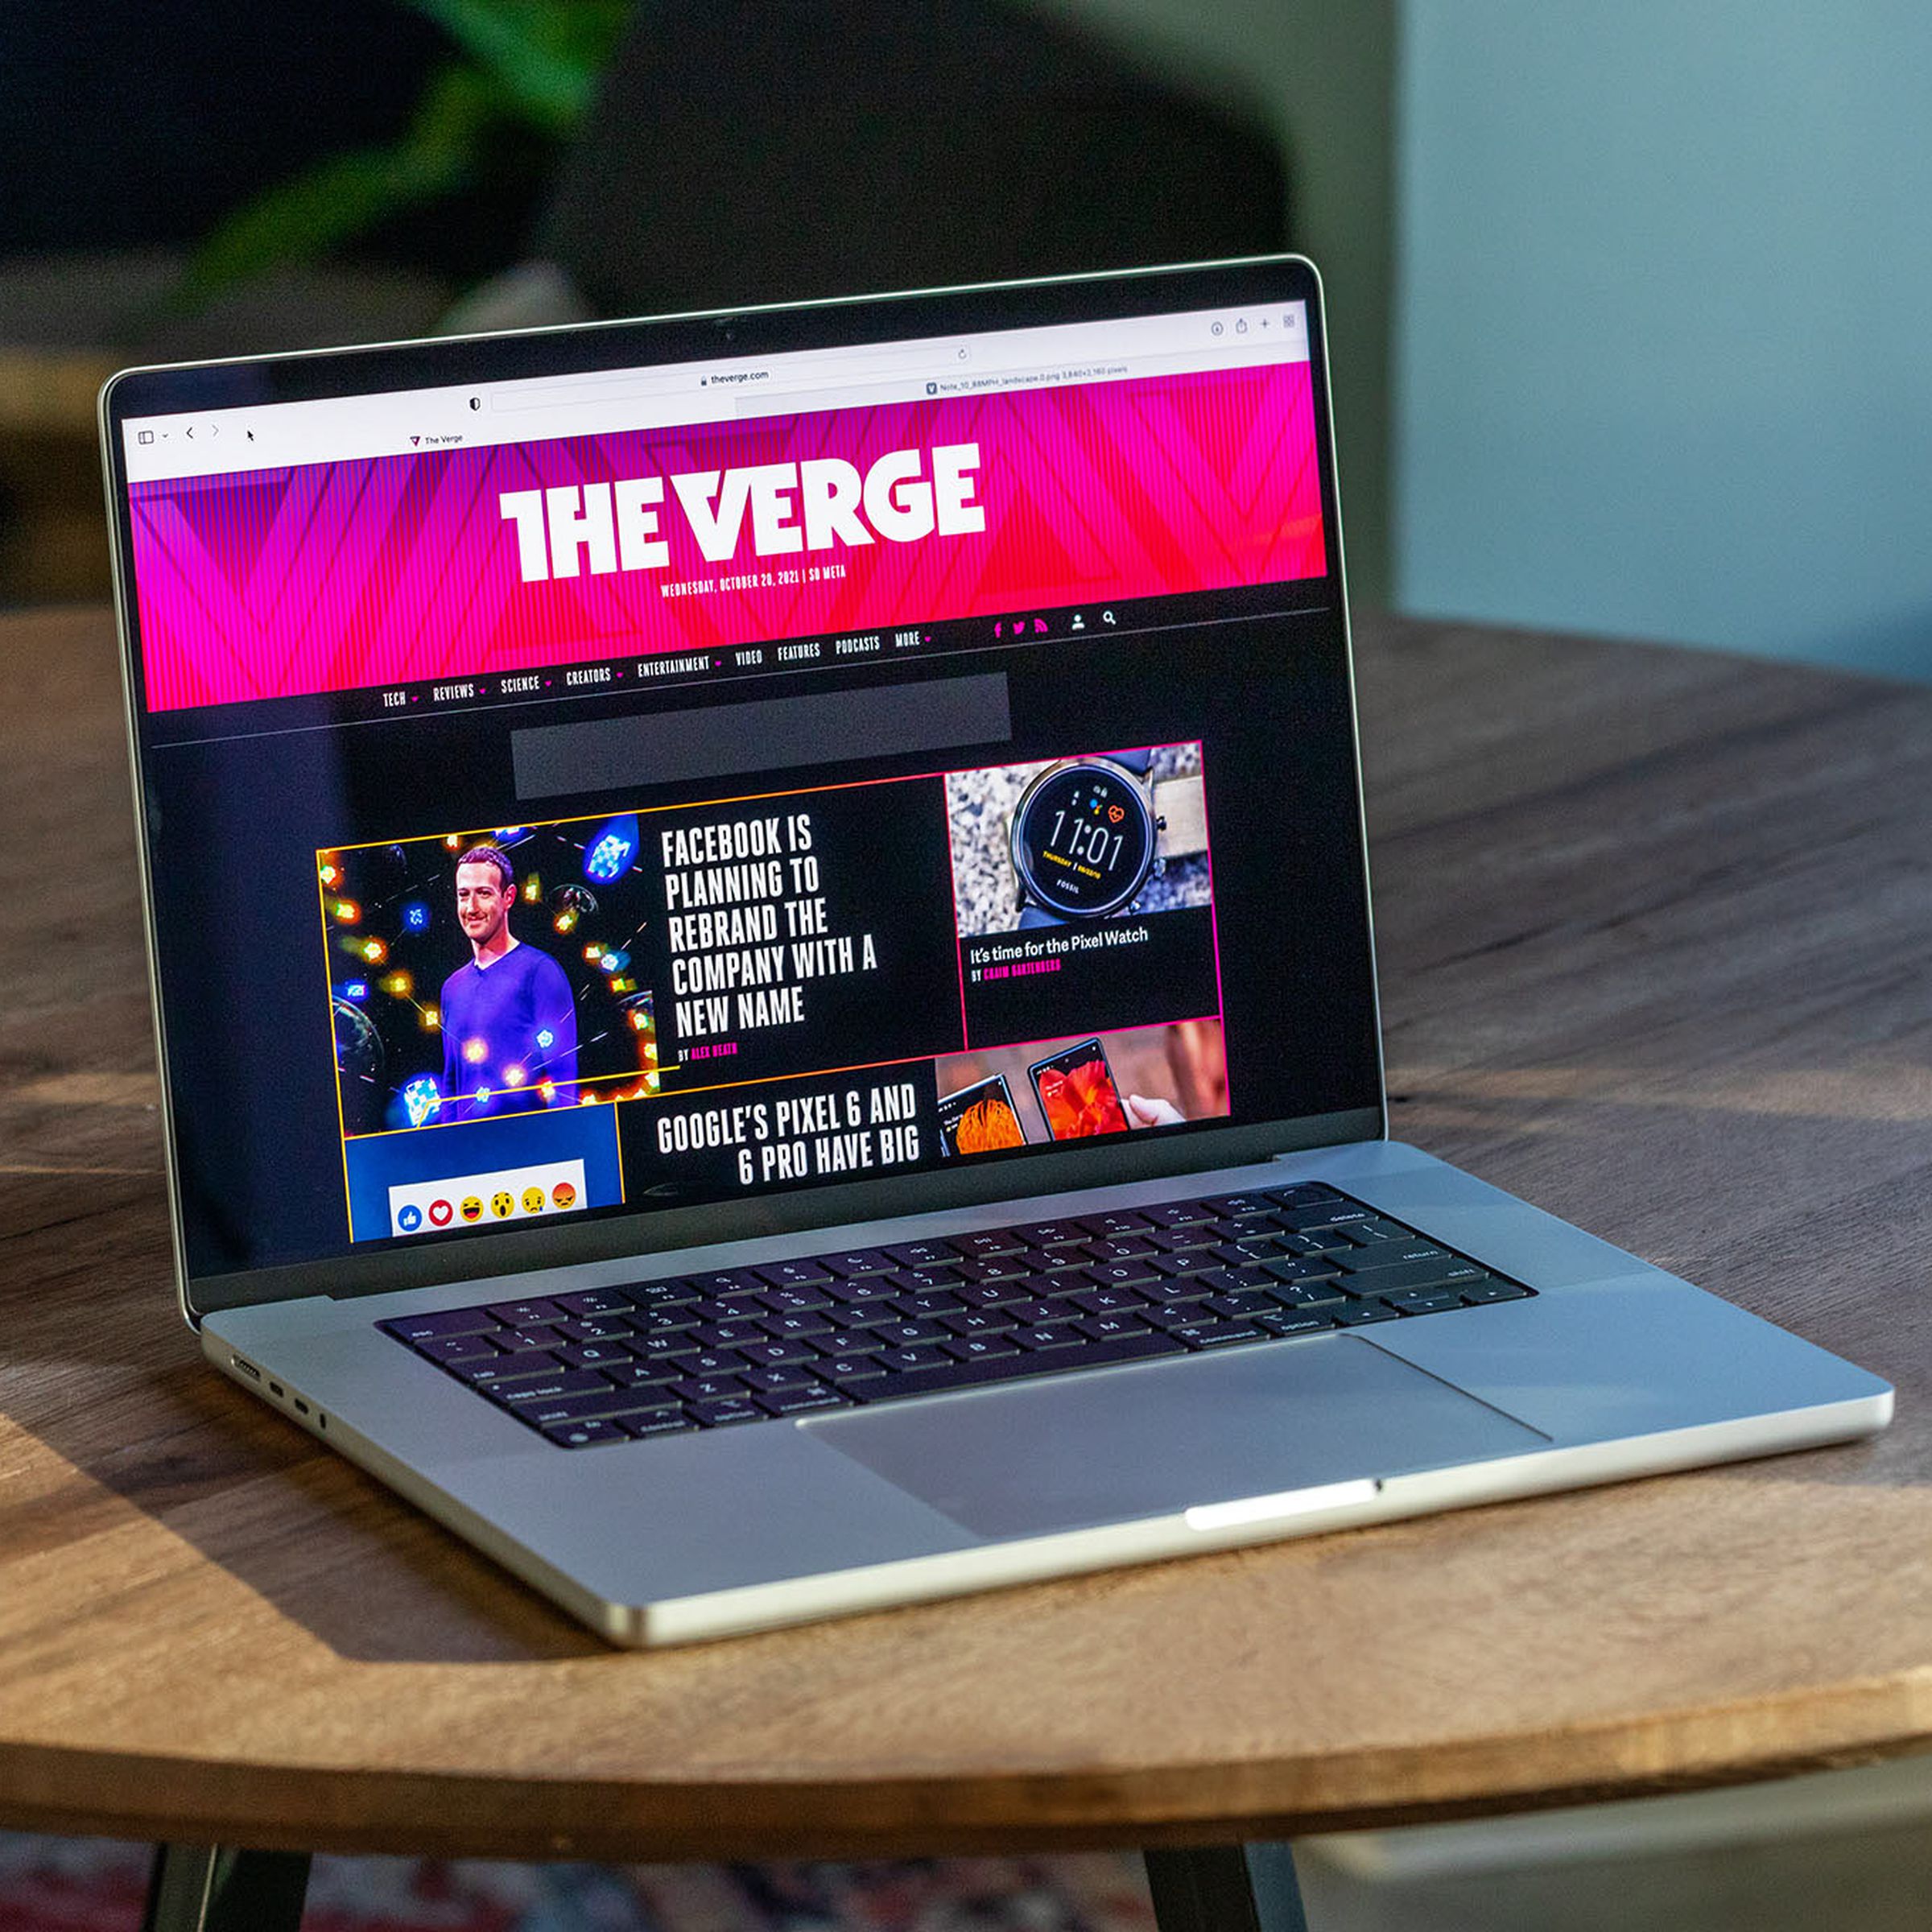 The new 16-inch MacBook Pro on the table